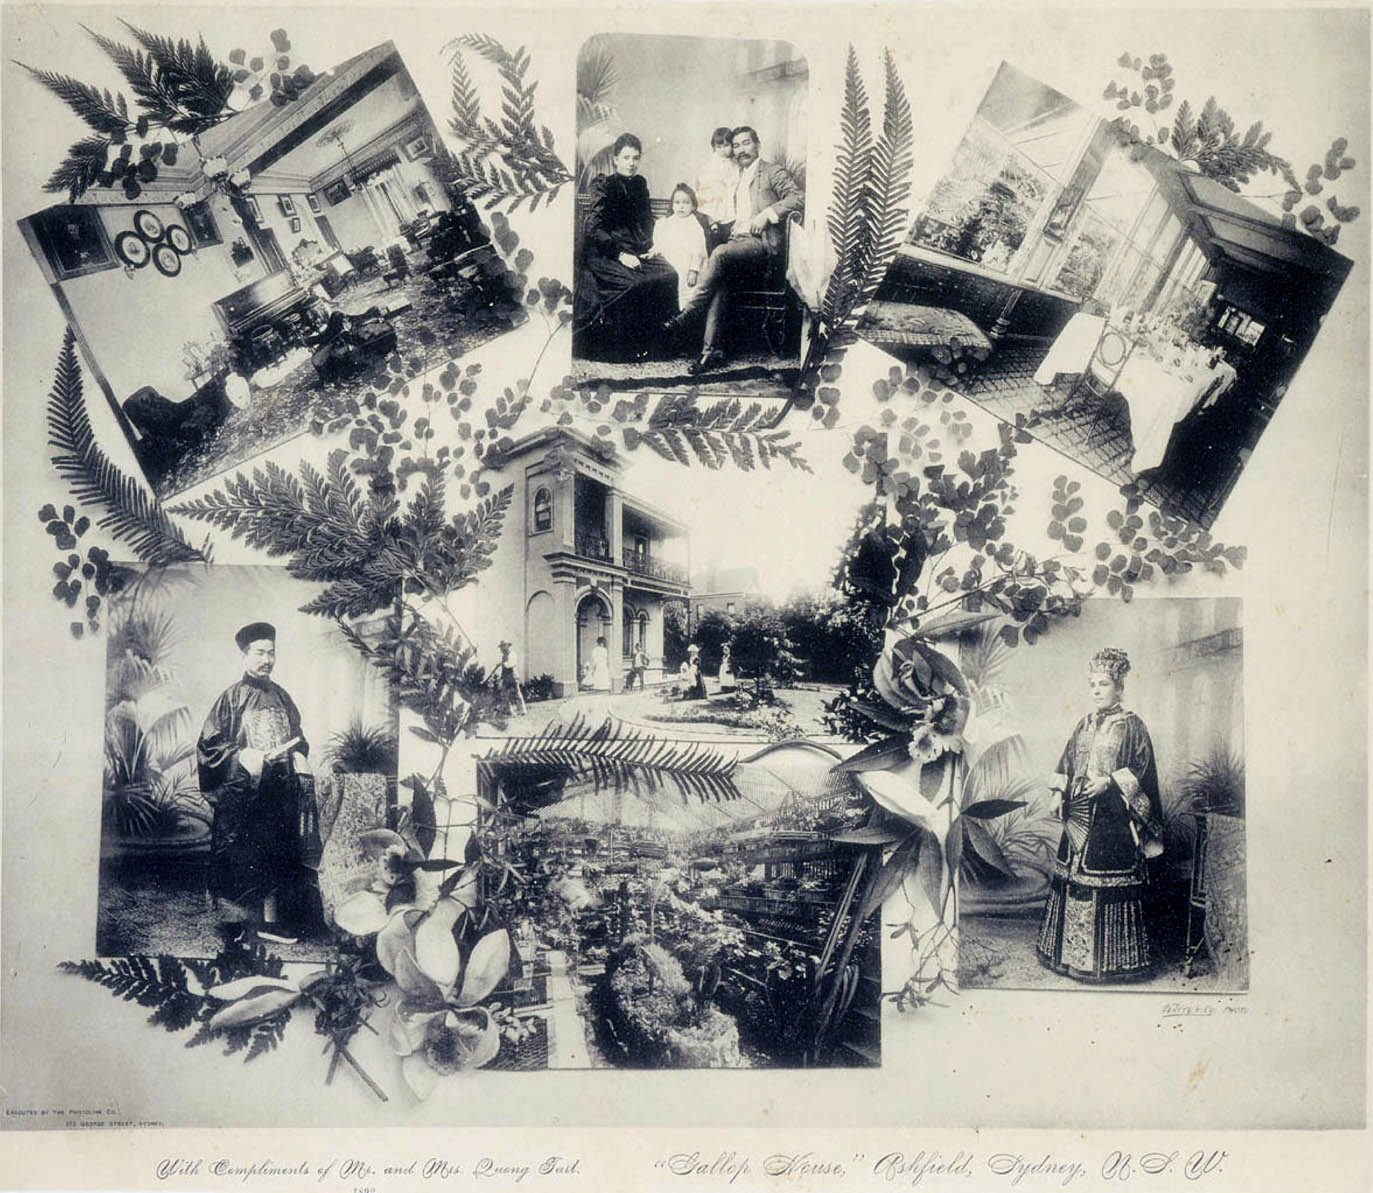 Image 3 of 6 - Collage of black and white images containing Quong Tart, his wife, their house and fernery. Images are intertwined with leaves and flowers. Bottom text reads ‘With compliments of Mr & Mrs Quong Tart, 1892’ … ‘“Gallop House